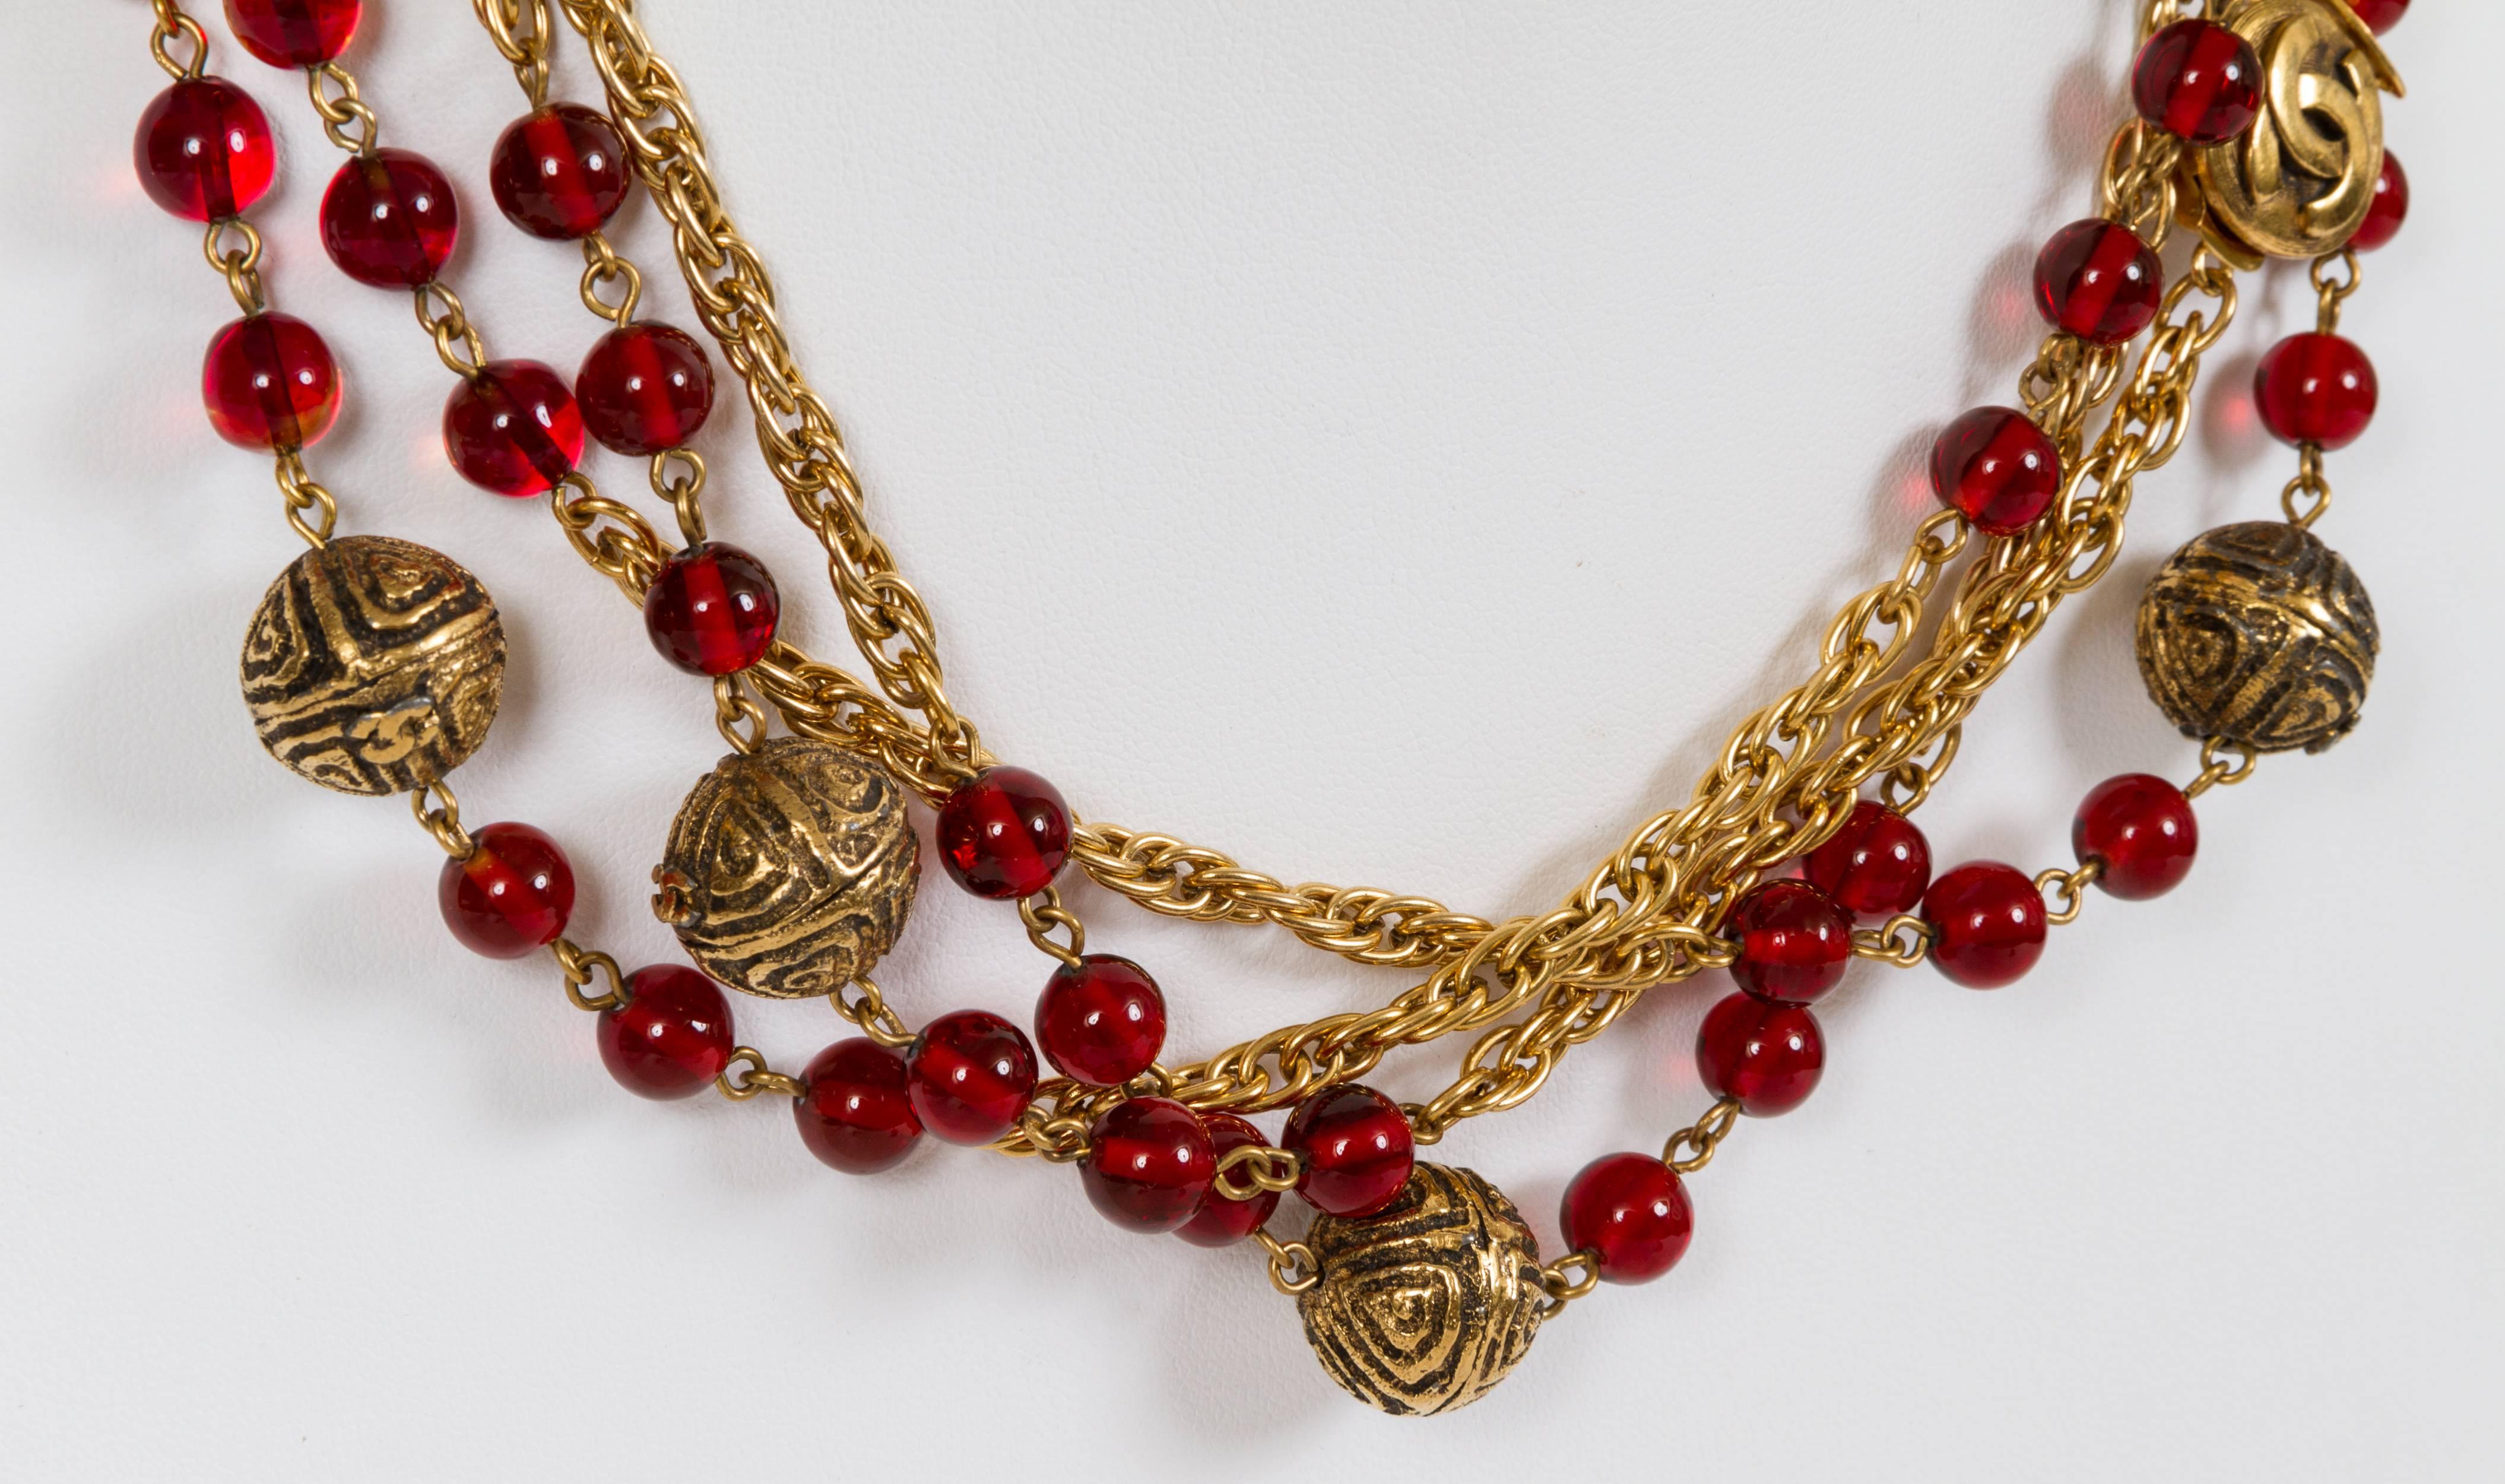 Chanel rare red gripoix cranberry sautoir necklace. Collection 1985. Can be worn up to 4 strands. Comes with original box. Glass stones with 18k plated rhodium. 